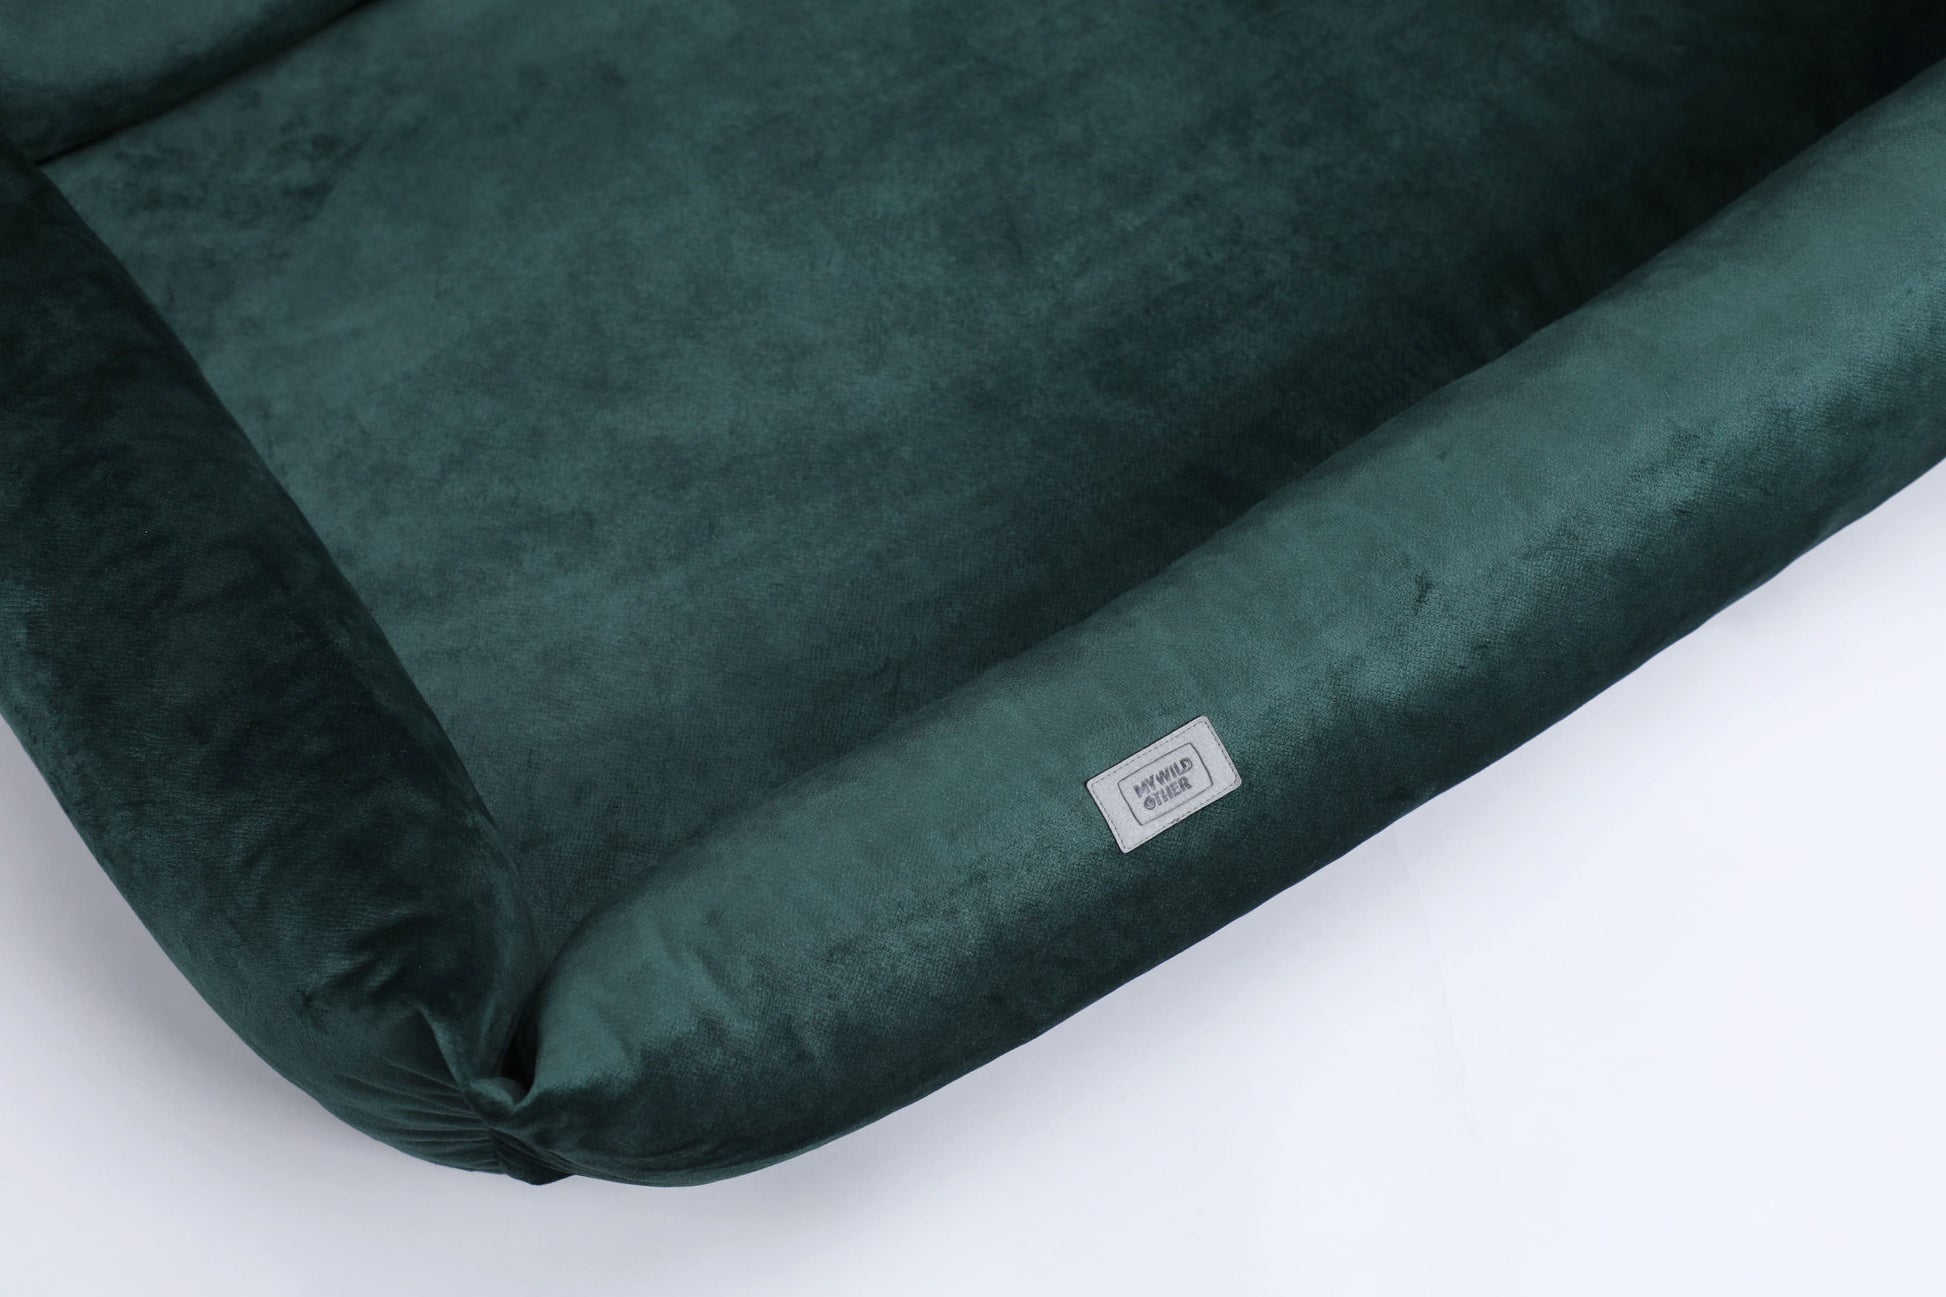 Premium dog bed with sides | 2-sided | EMERALD GREEN - premium dog goods handmade in Europe by My Wild Other